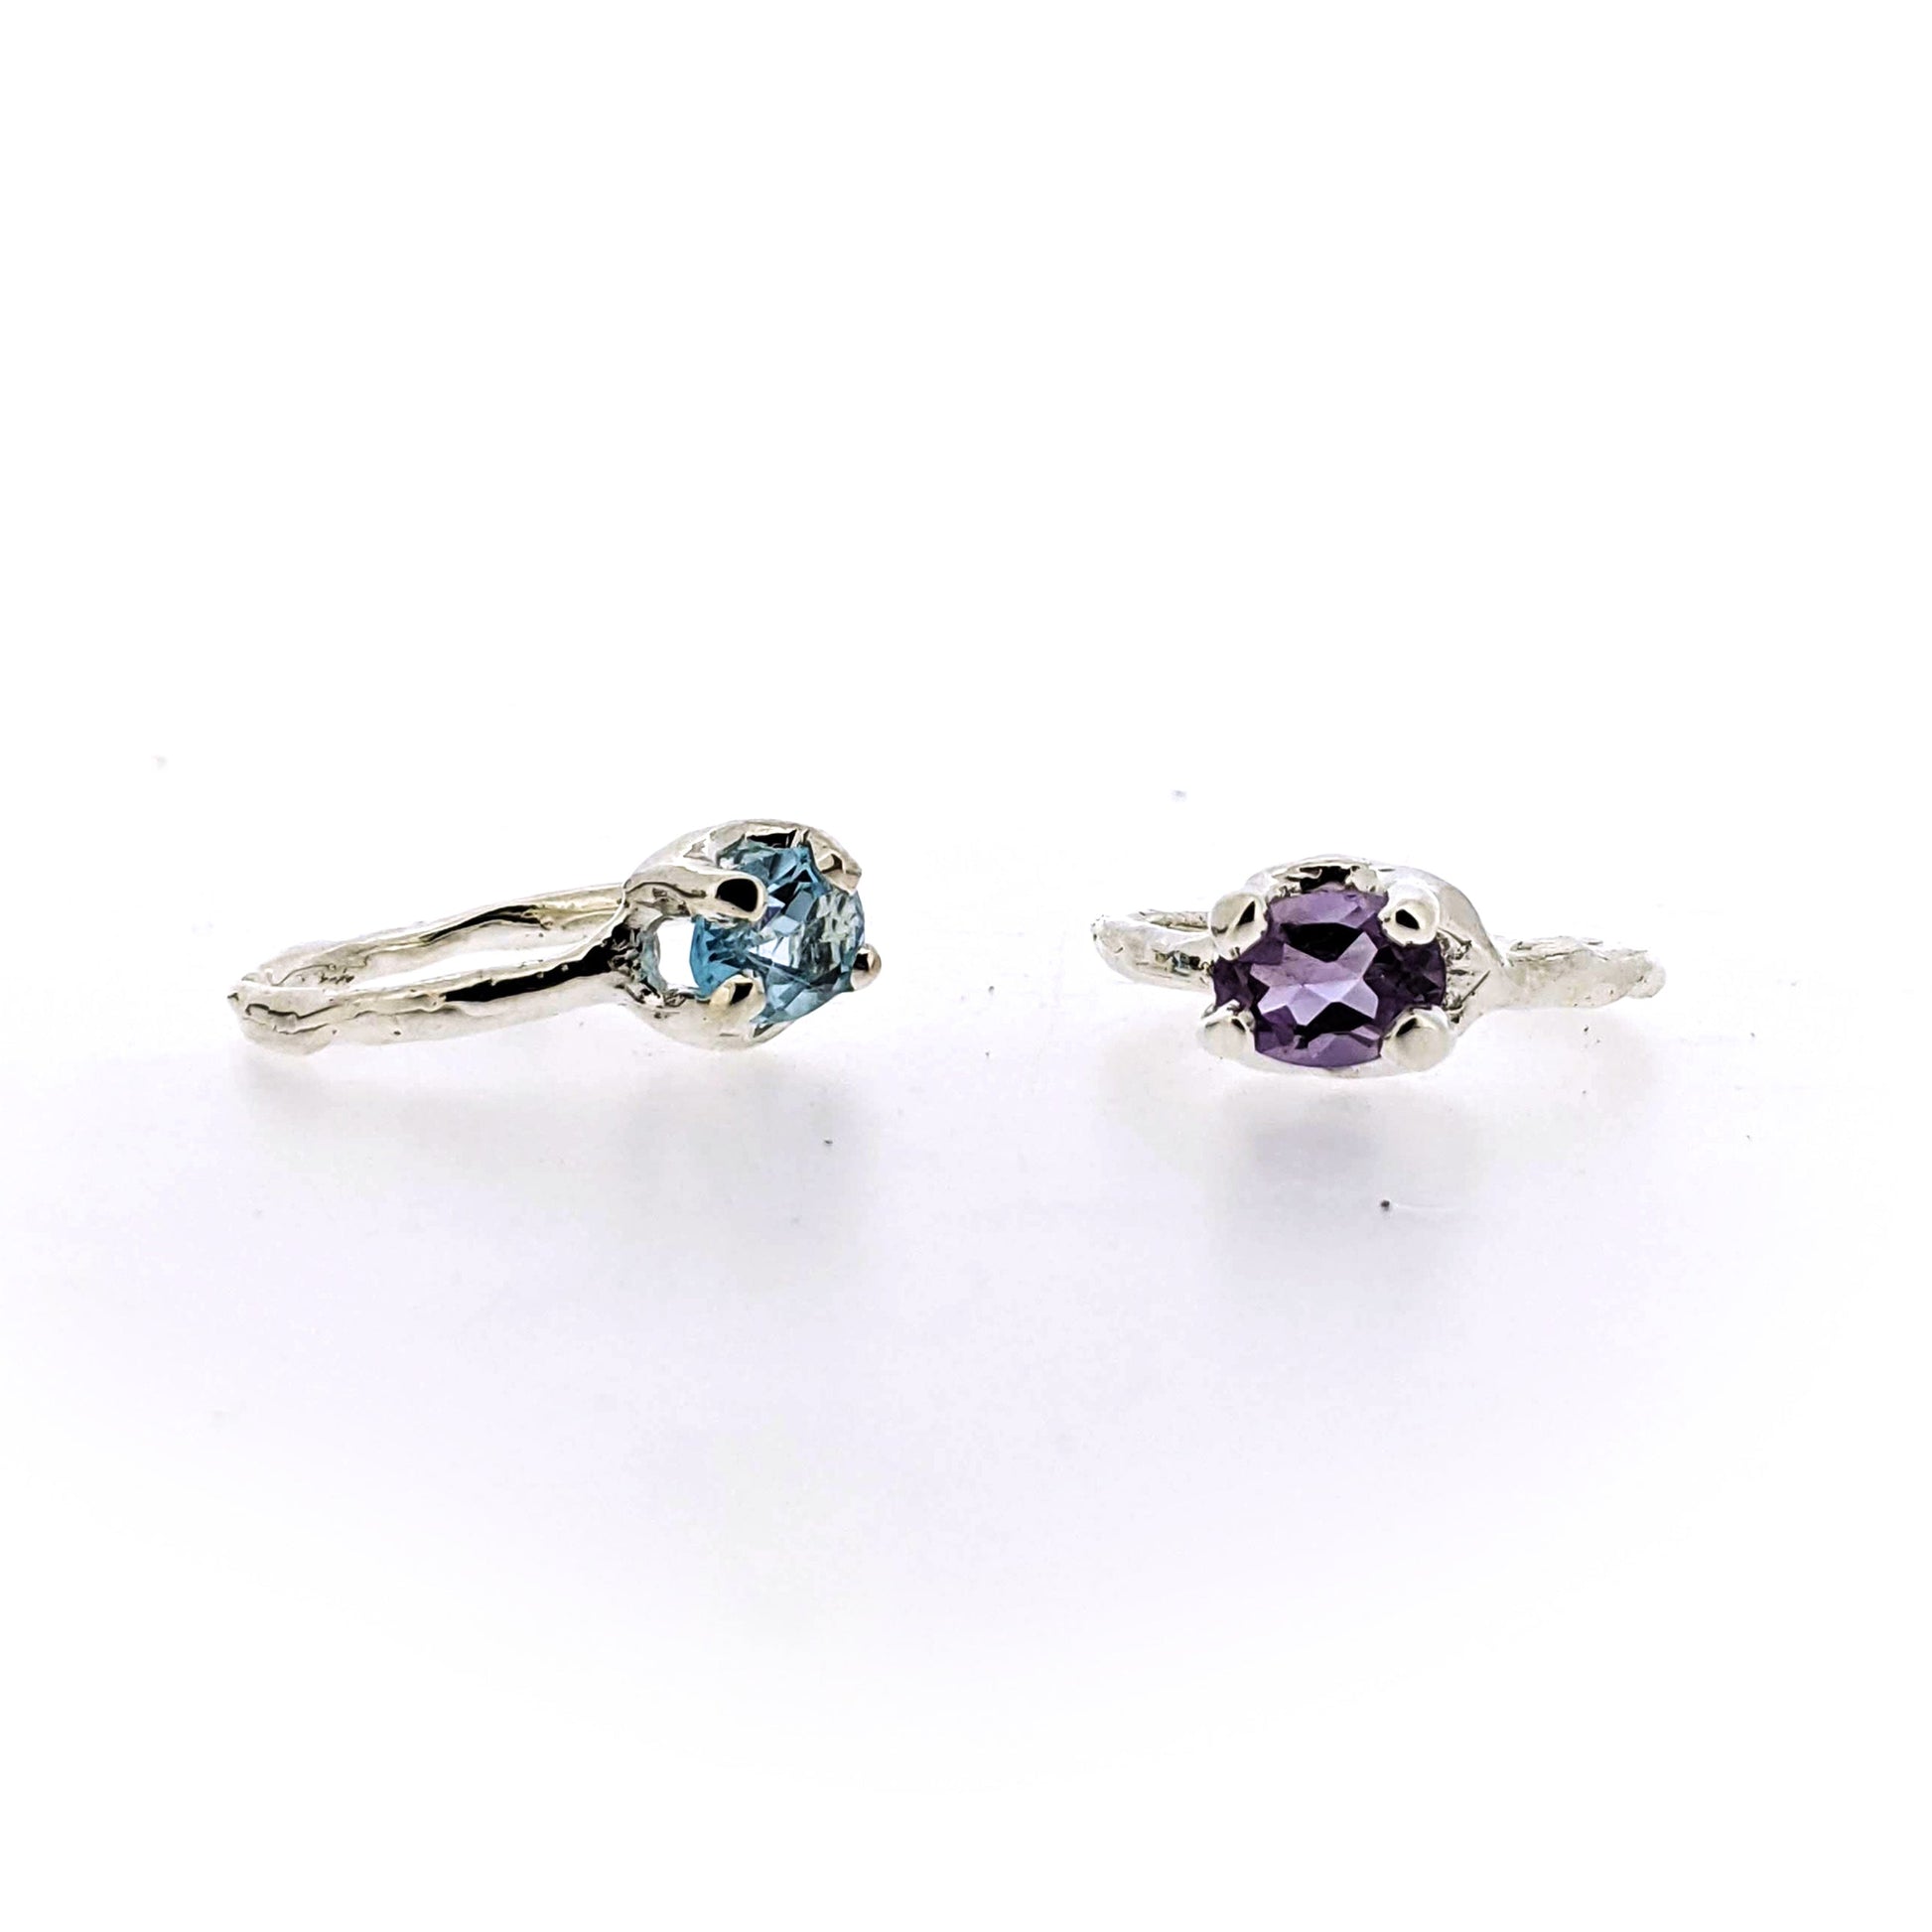 Full side and frontal view of Blue Topaz and Amethyst Ada Ring.